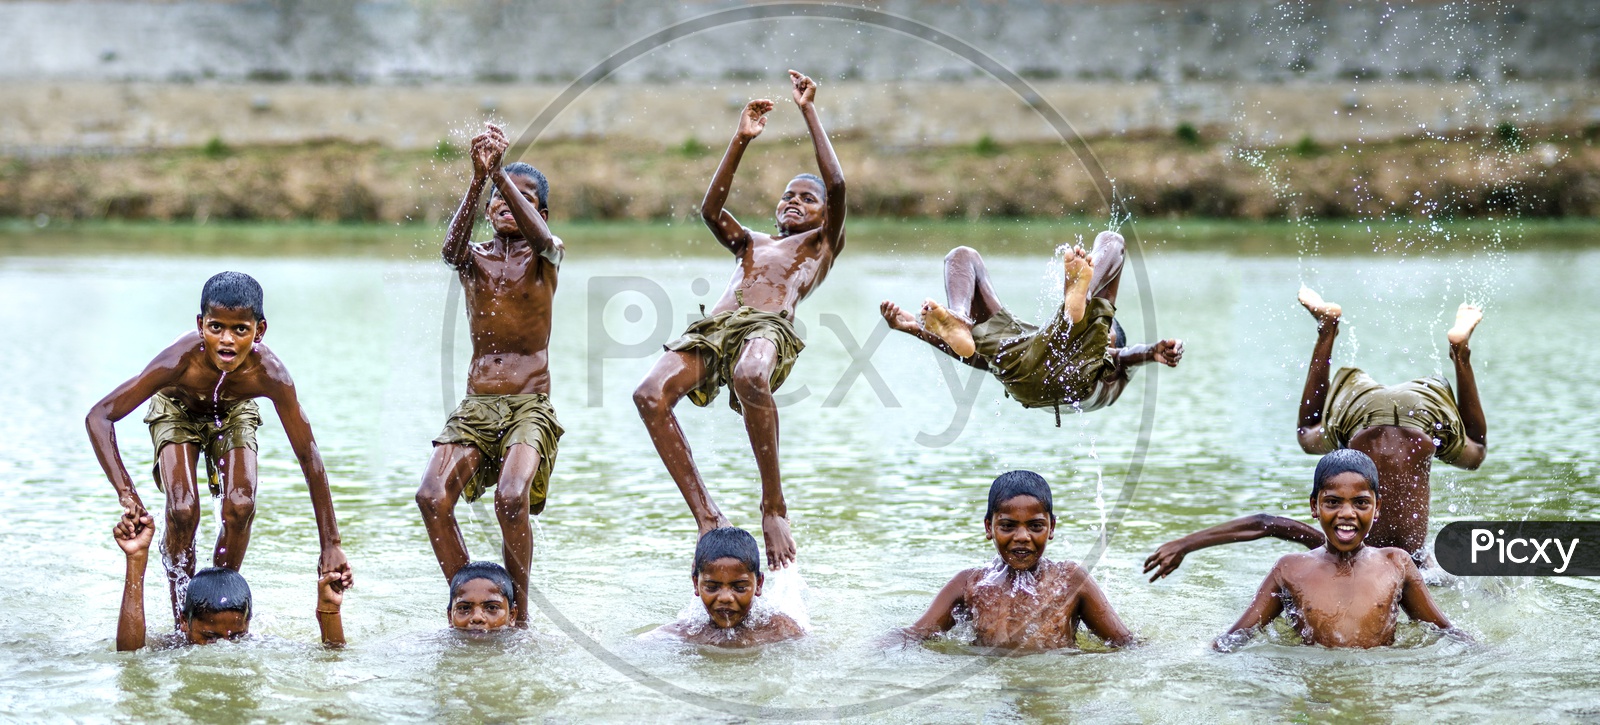 Boys jumping in the water